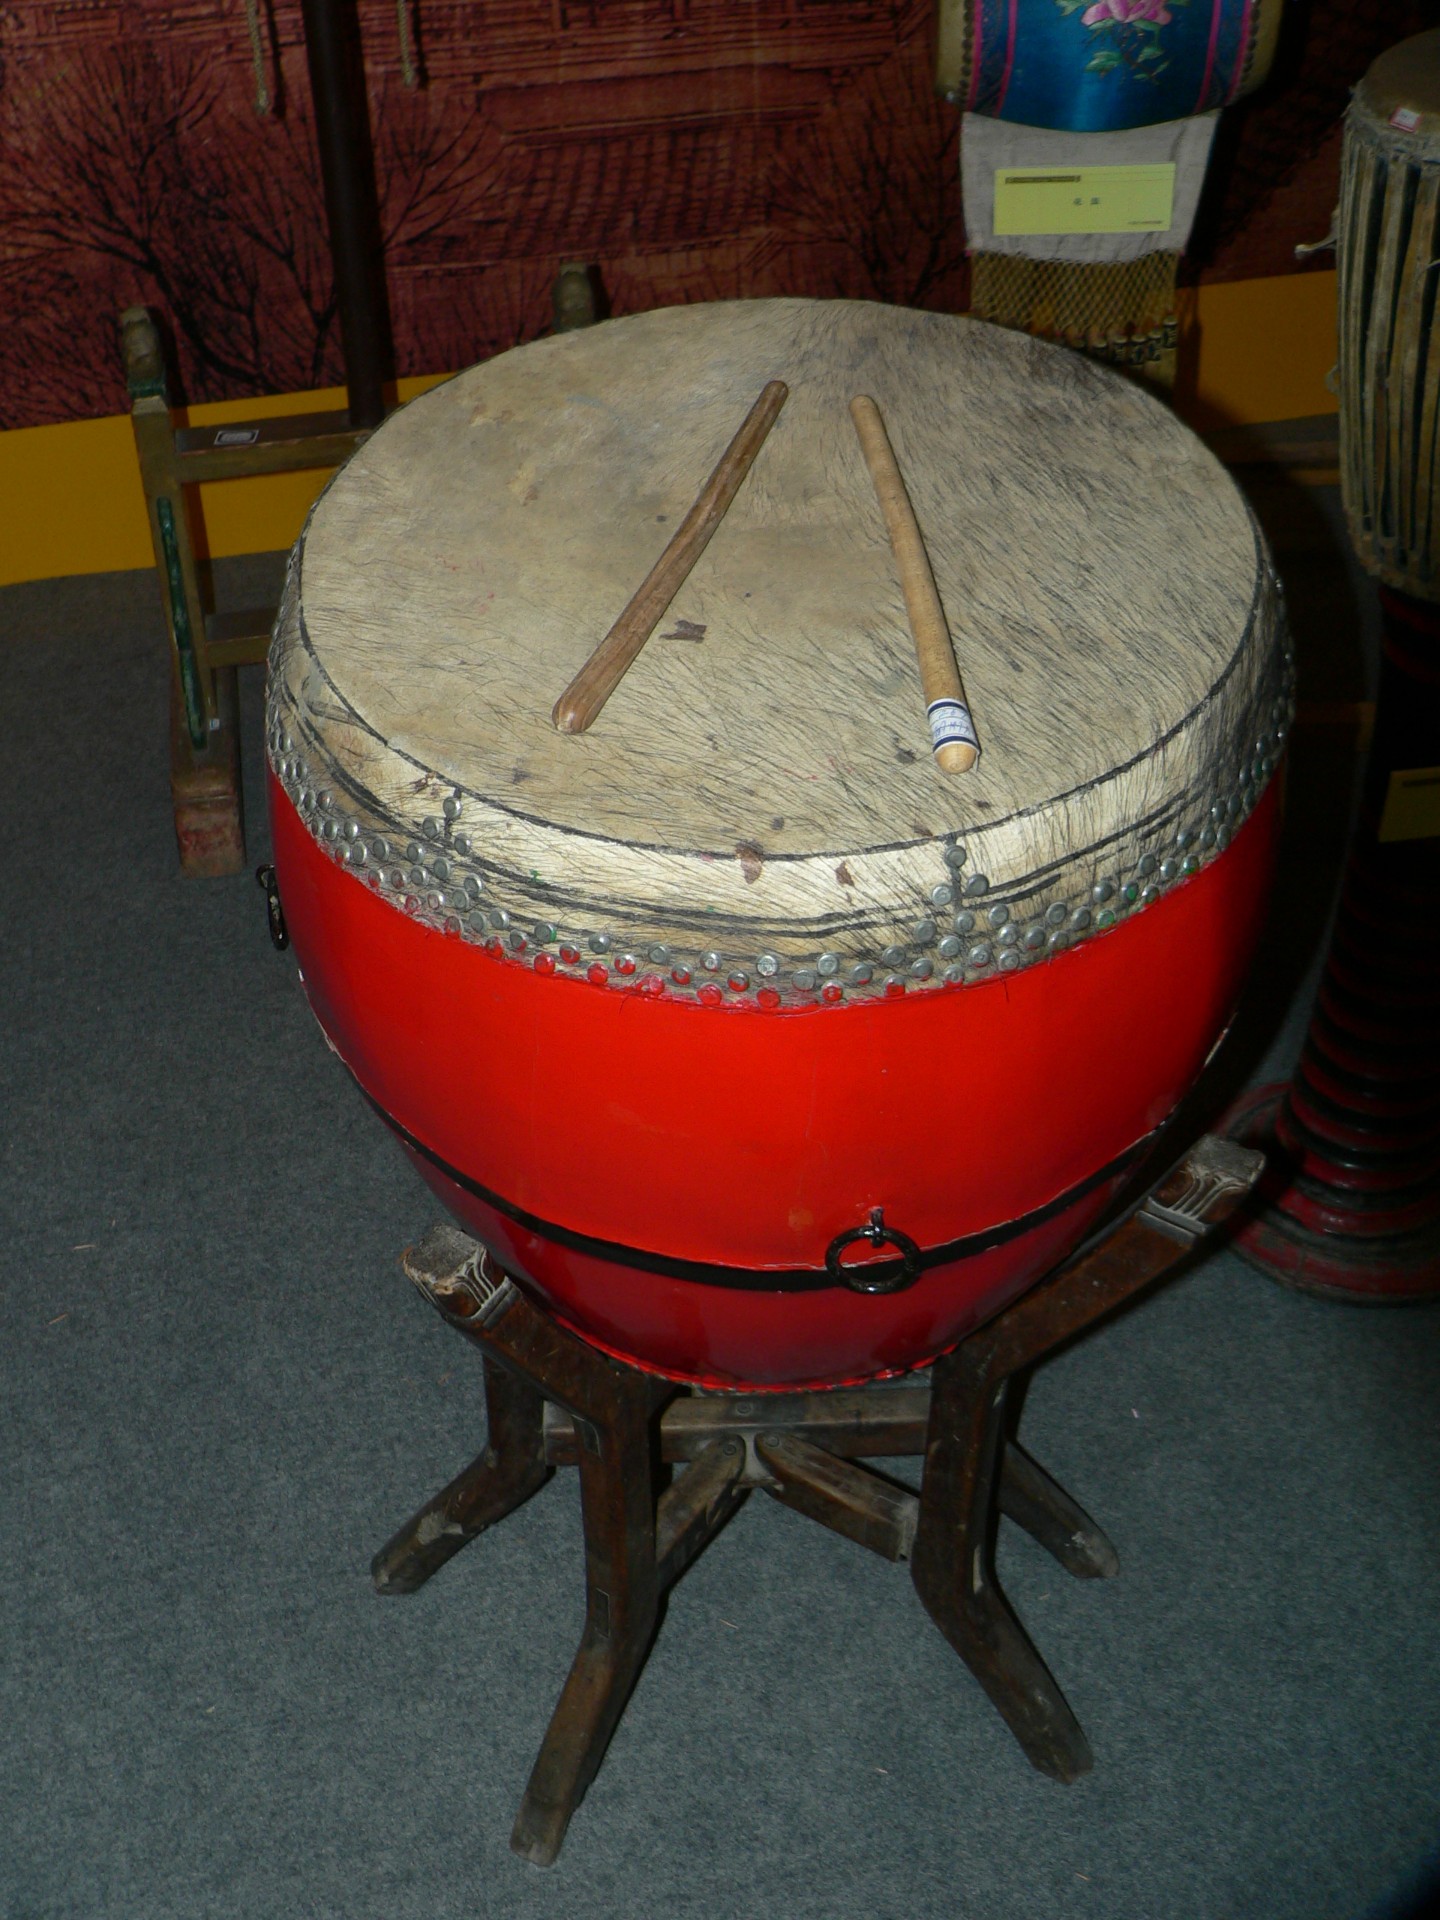 The structure of the drum